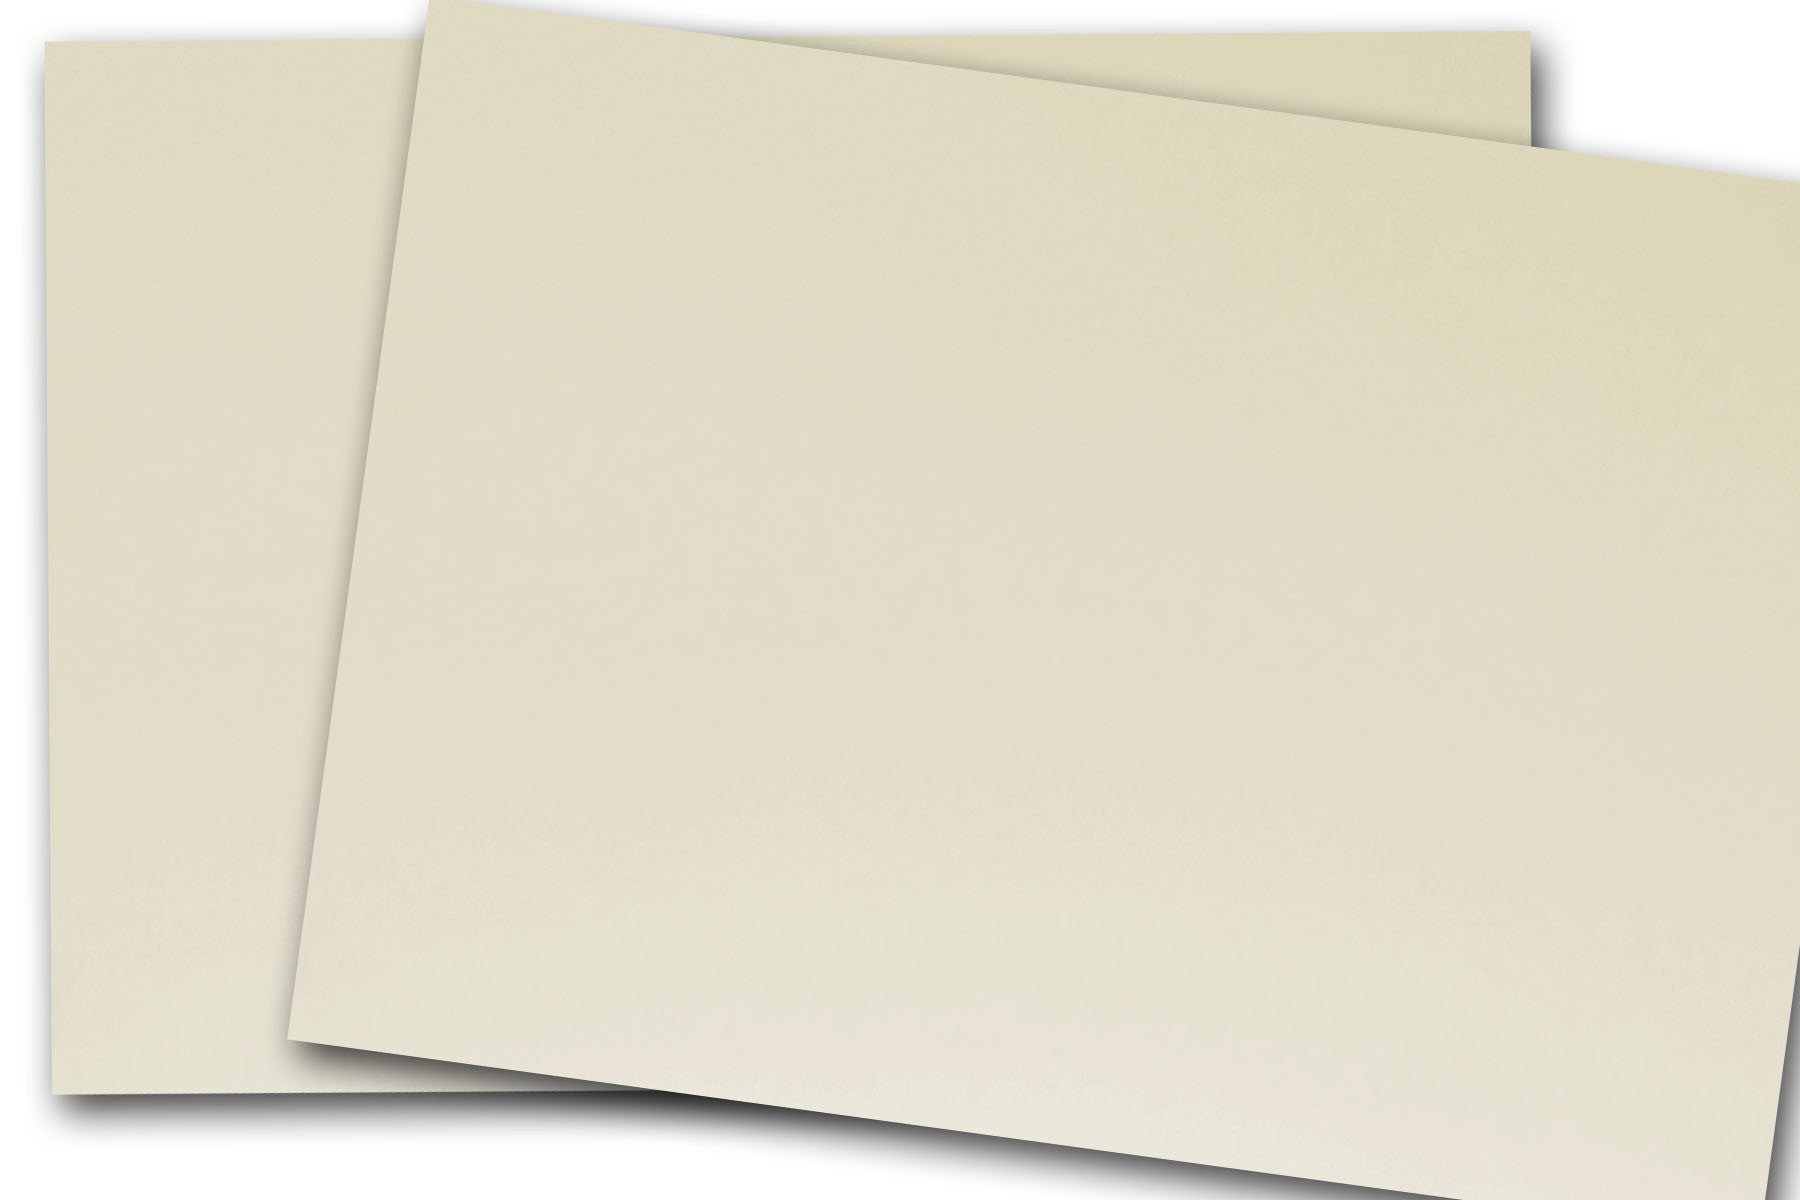 Classic Natural White Paper - 12 x 18 in 80 lb Text Smooth